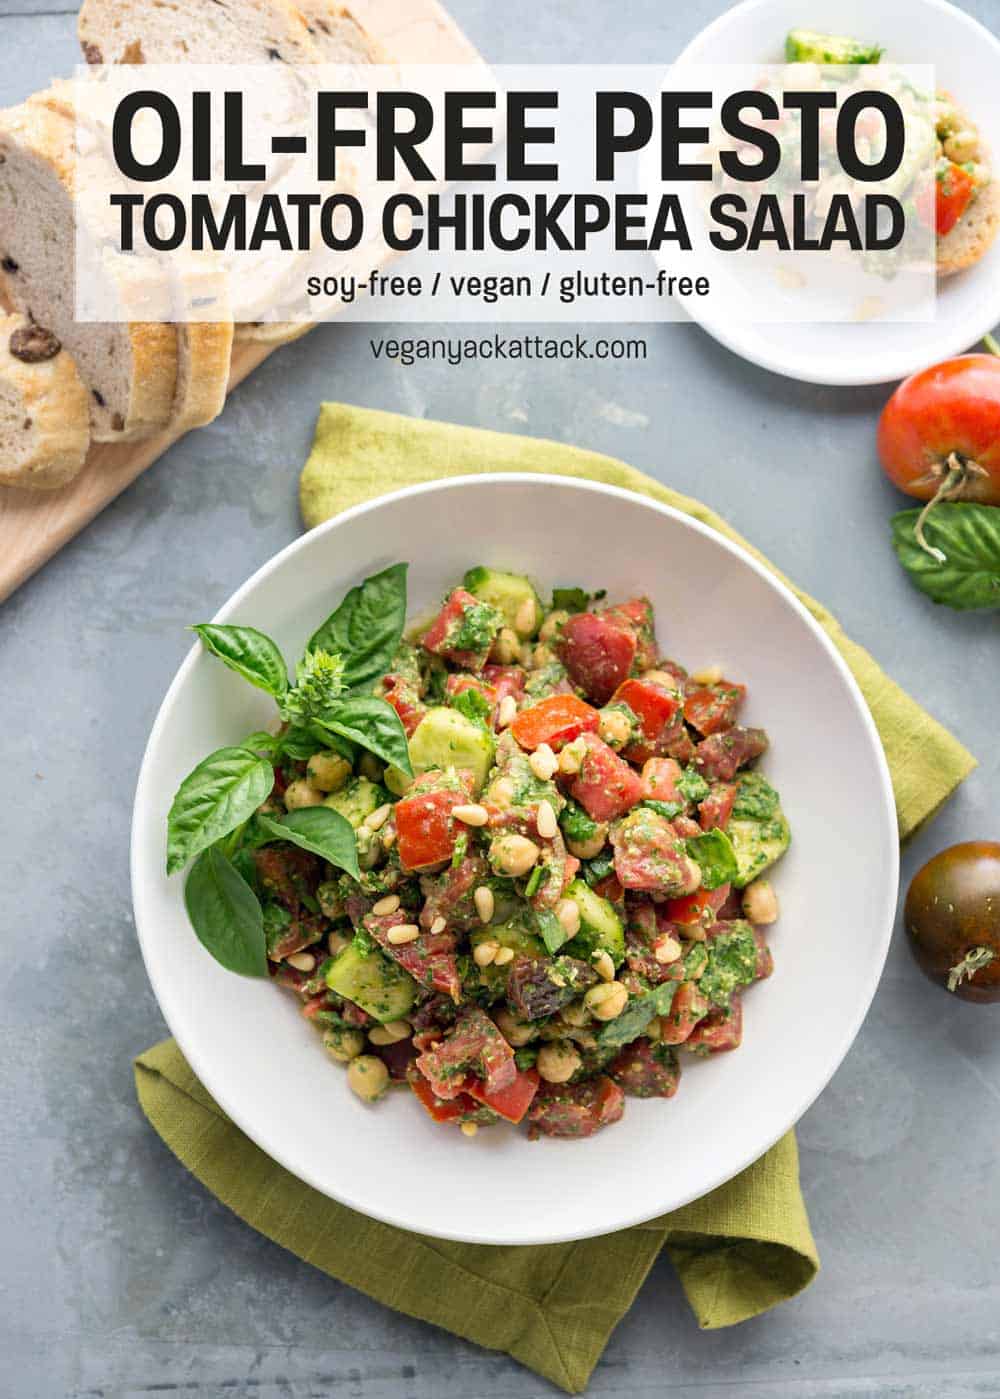 Oil-free Pesto Tomato Chickpea Salad in a white bowl on a steel background 